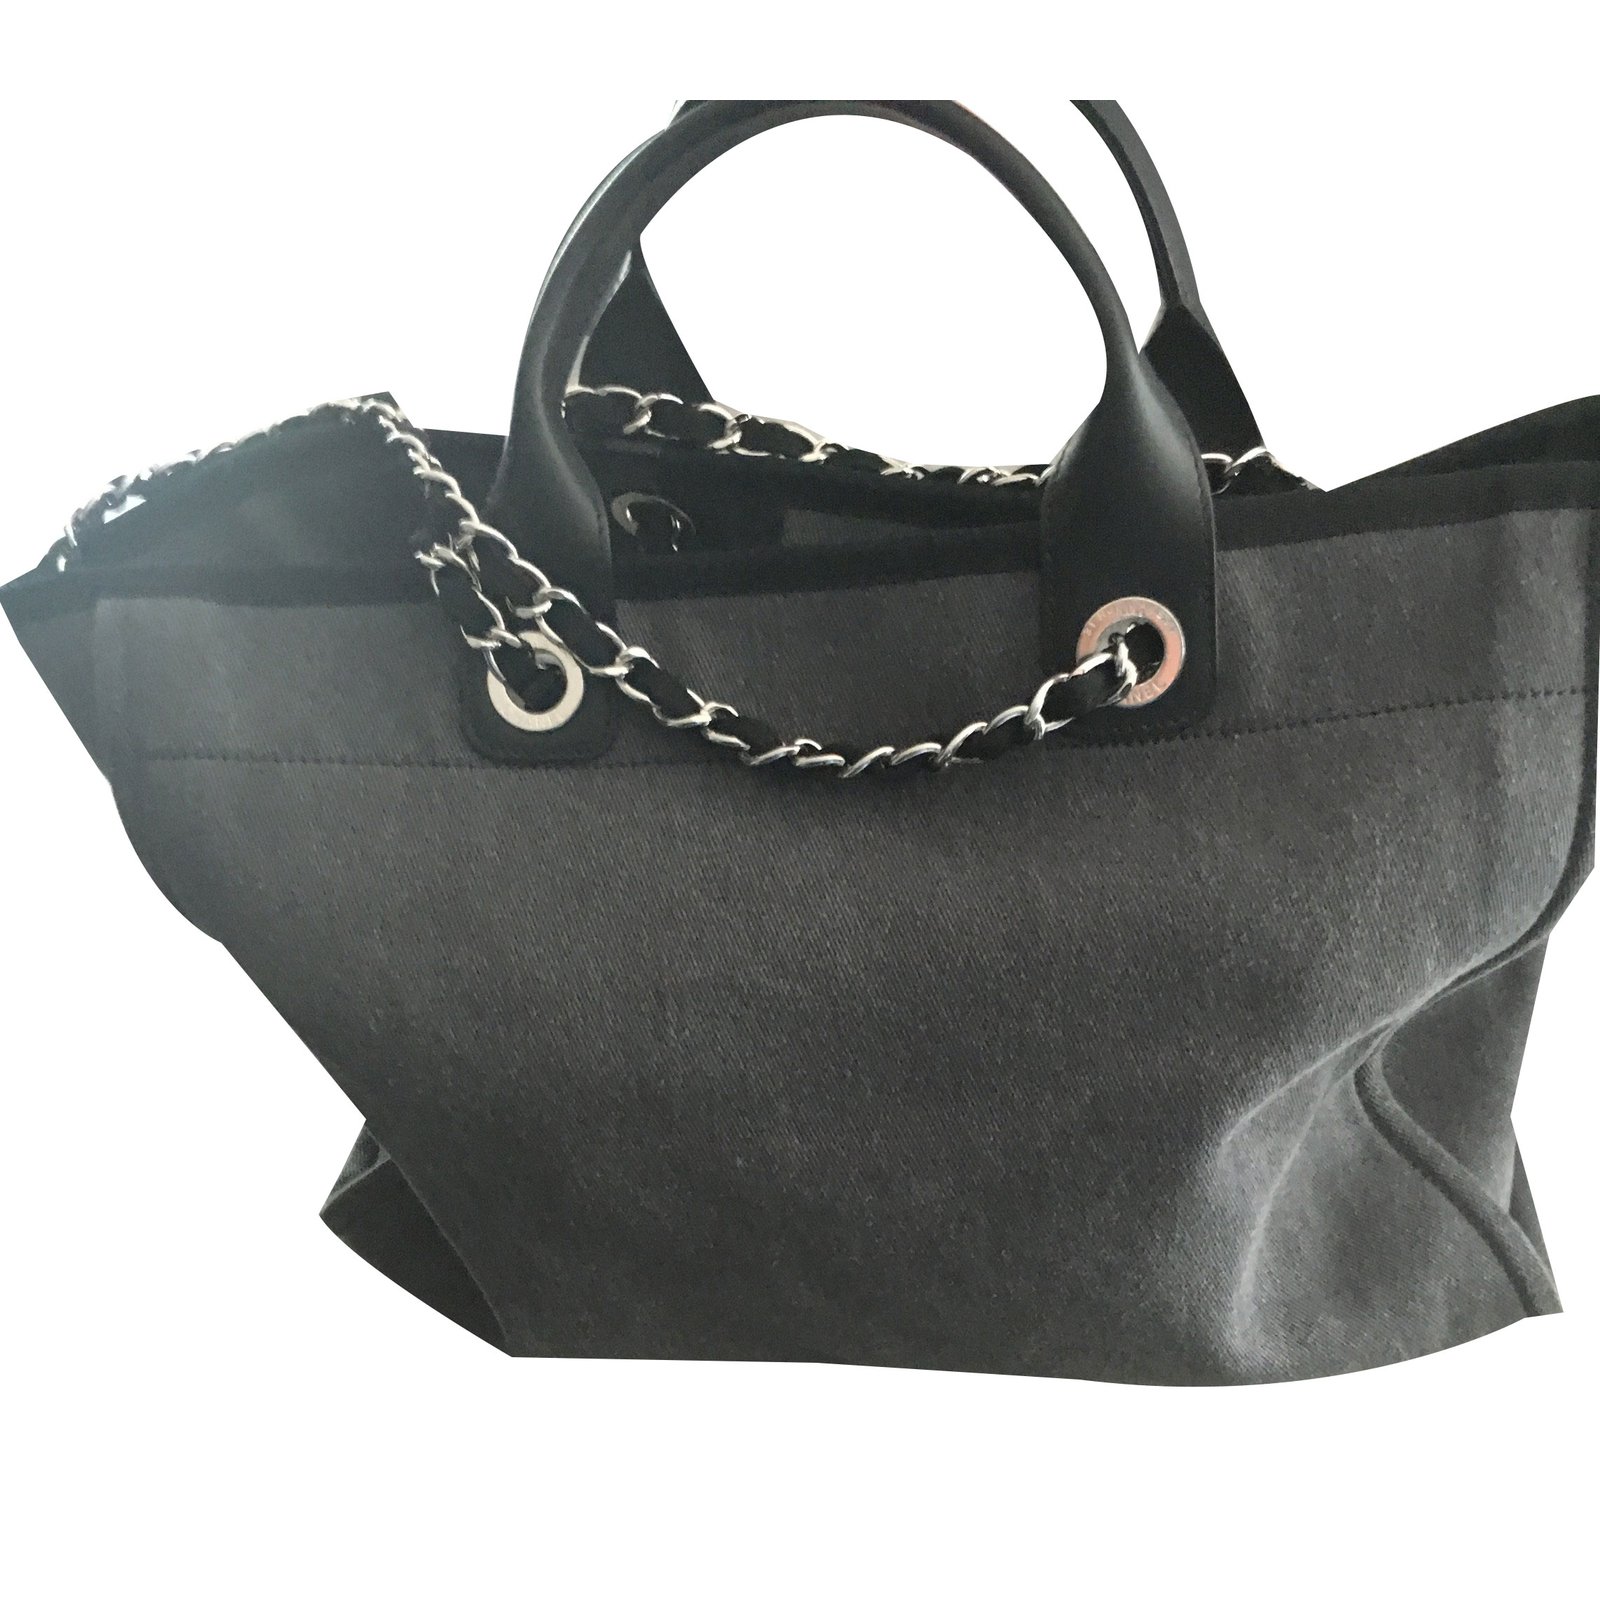 Chanel Grey & Black Canvas Large Deauville Tote, myGemma